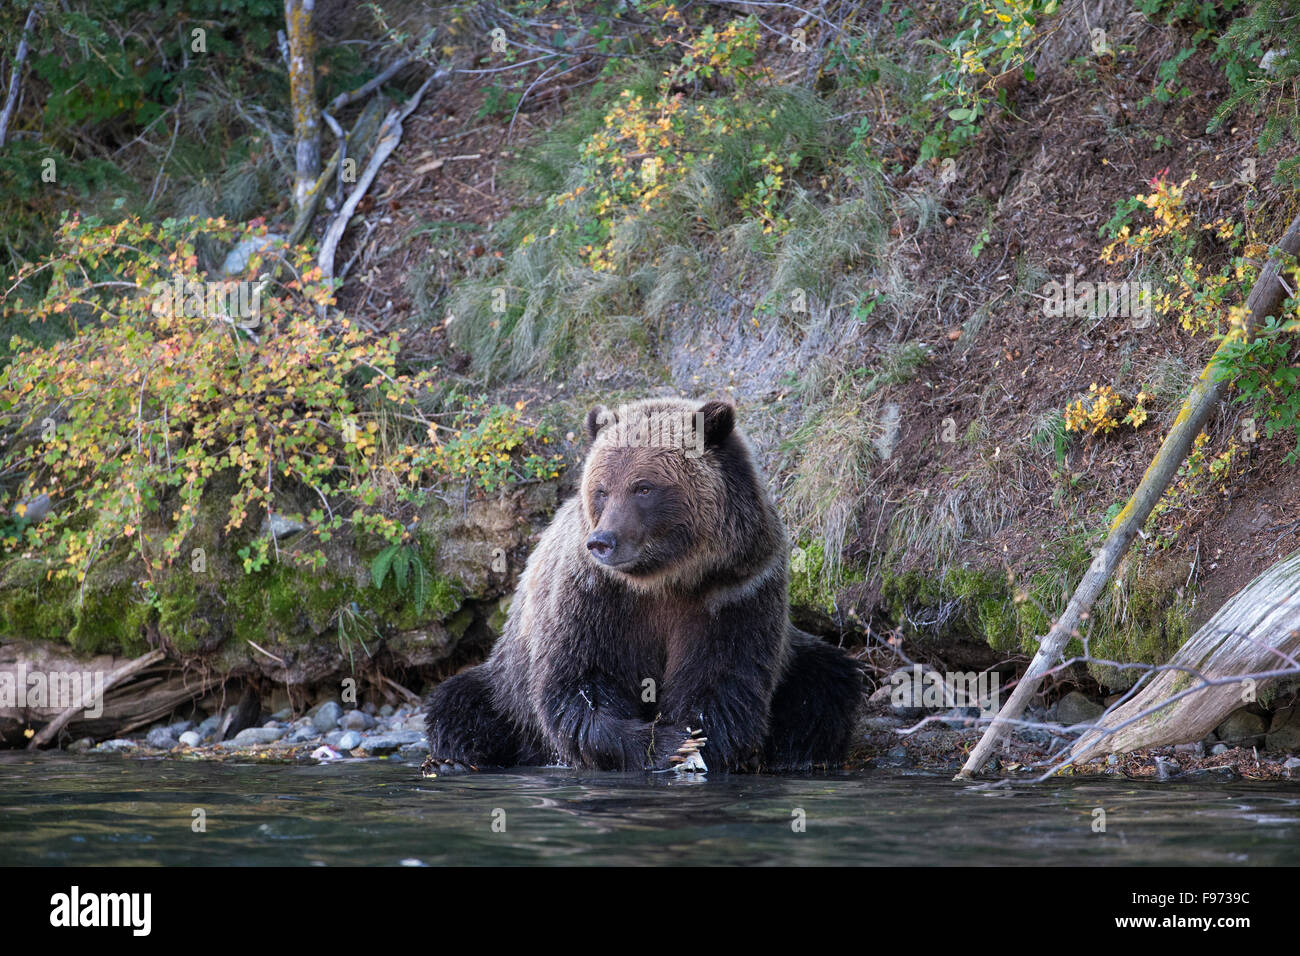 Grizzly bear (Ursus arctos horribilis), with  salmon (Oncorhynchus sp.), Central Interior, British Columbia. Stock Photo